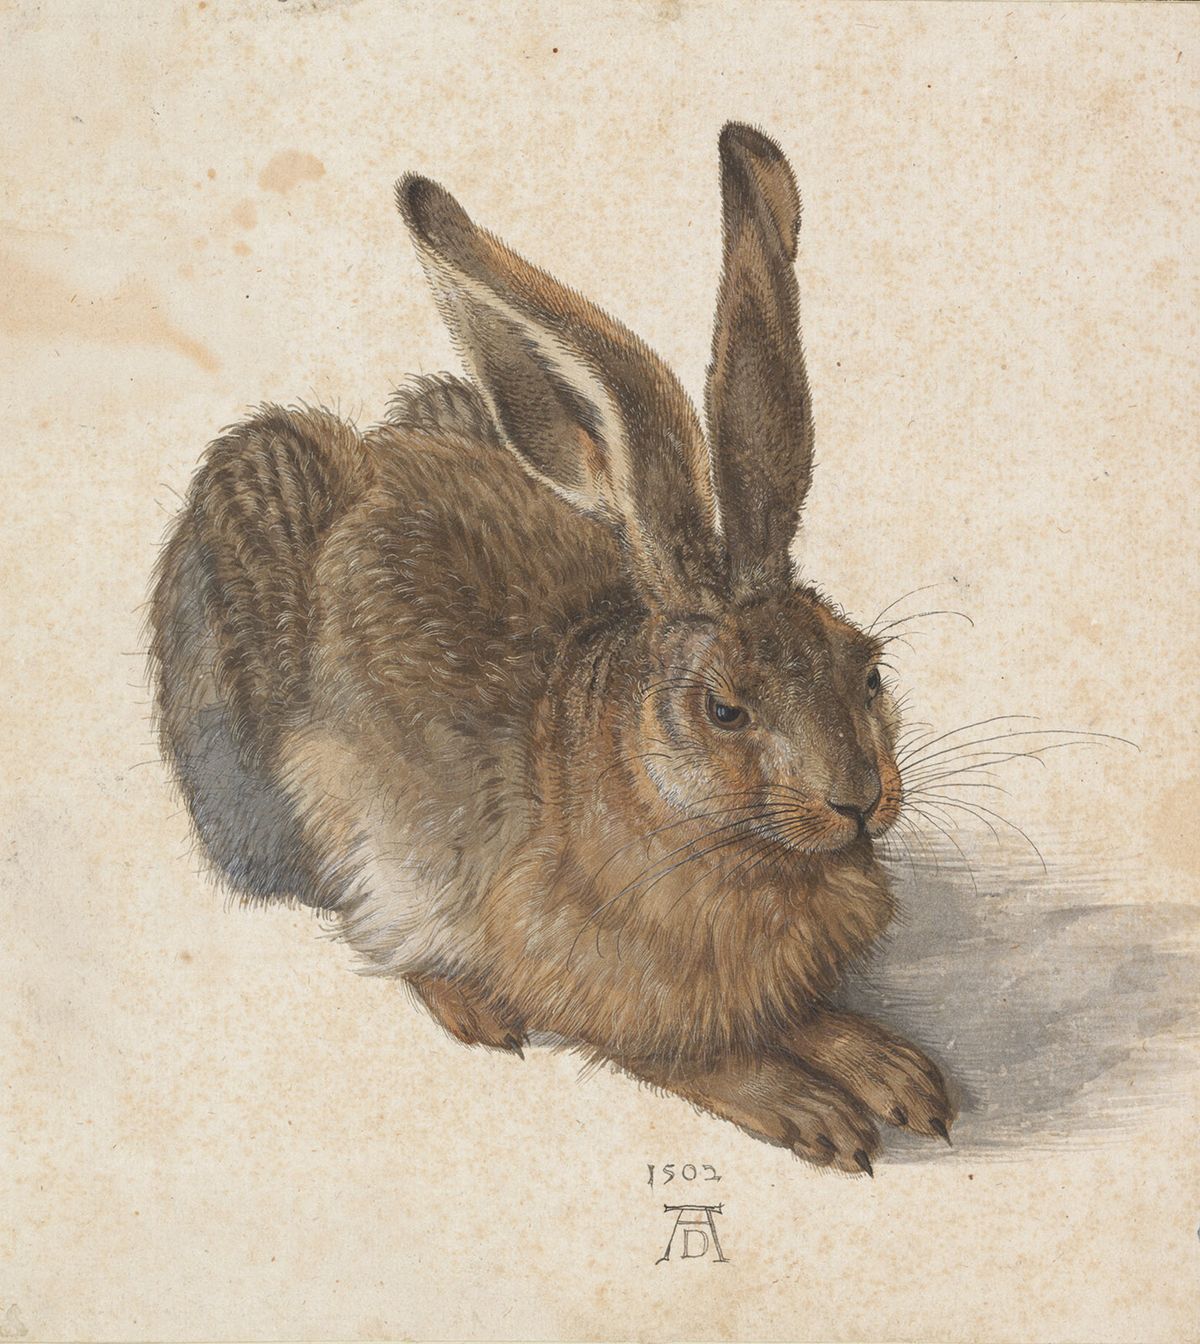 A drawing of Dürer’s famous Young Hare (1502) may have been used to demonstrate skill to potential patrons, rather than as a preparatory study © The Albertina Museum, Vienna